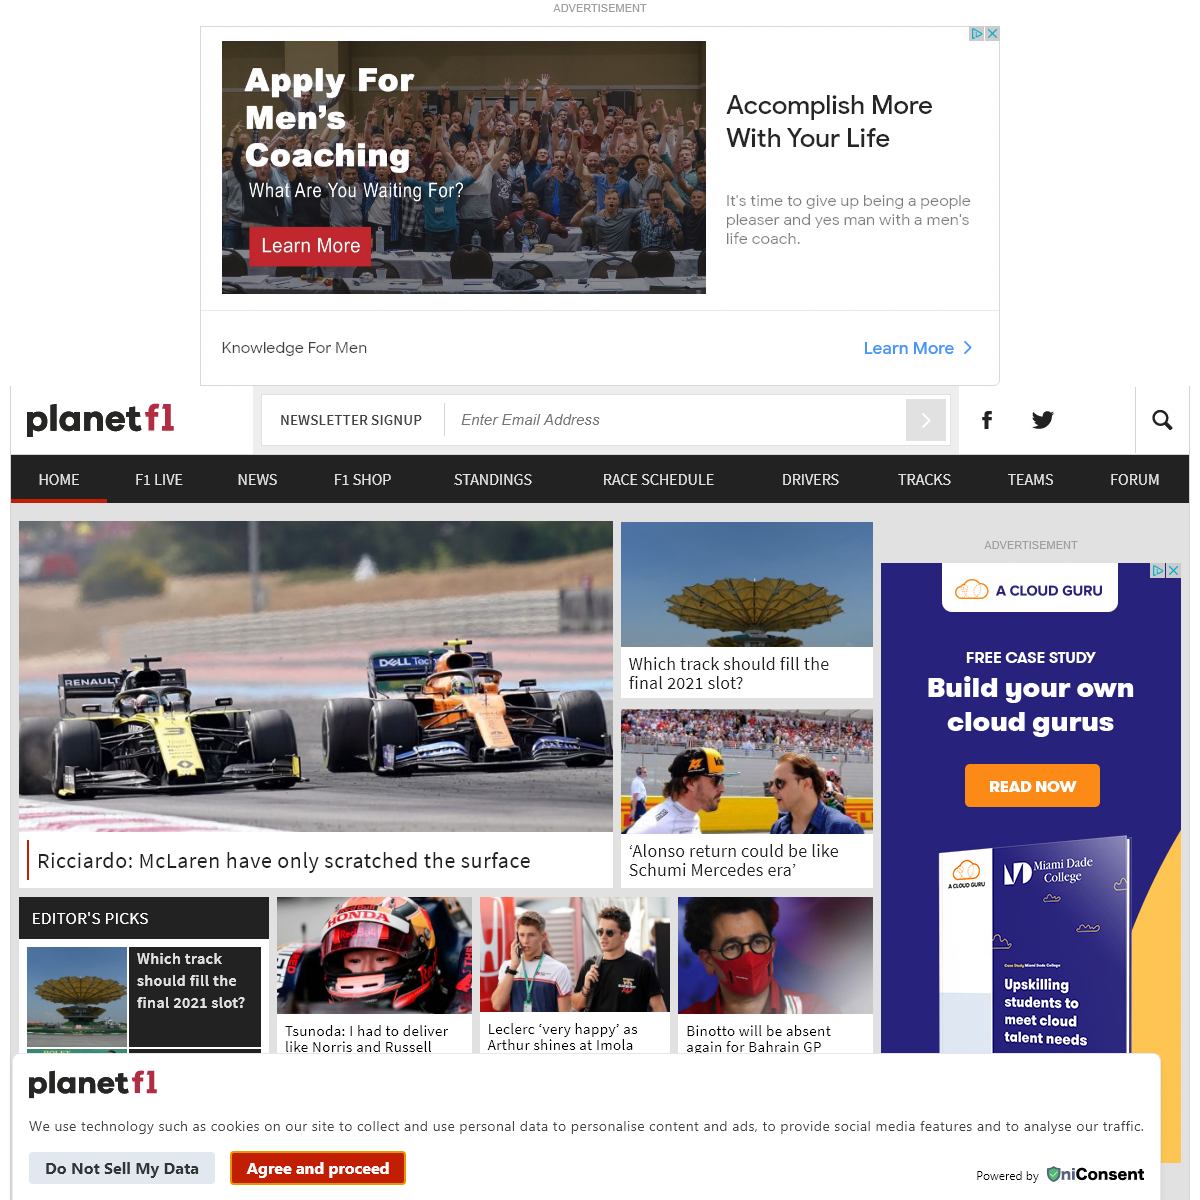 A complete backup of planetf1.com